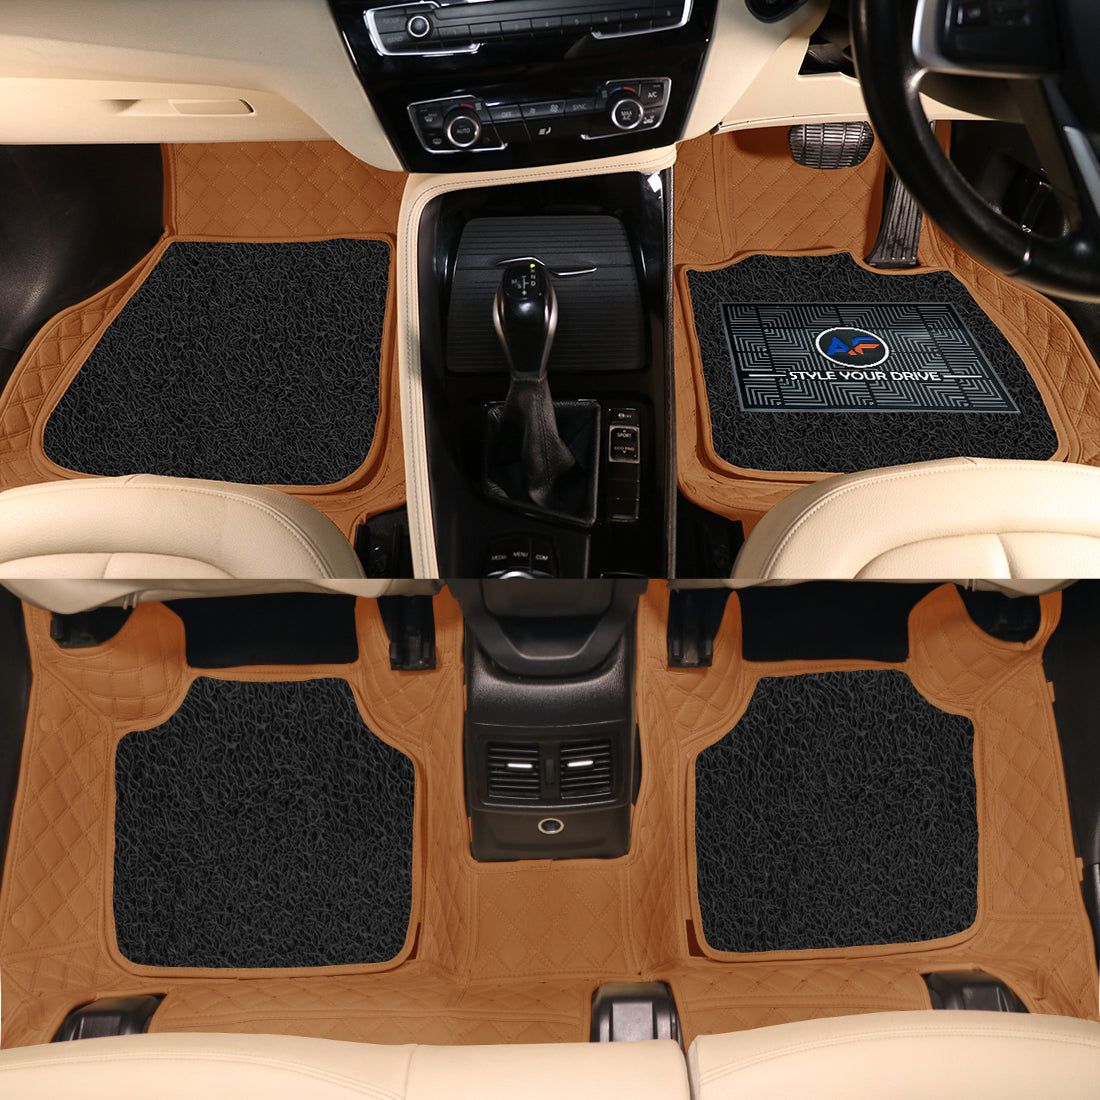 Land Rover Range Rover Discovery 2019 7D Luxury Car Mat, All Weather Proof, Anti-Skid, 100% Waterproof & Odorless with Unique Diamond Fish Design (24mm Luxury PU Leather, 2 Rows)